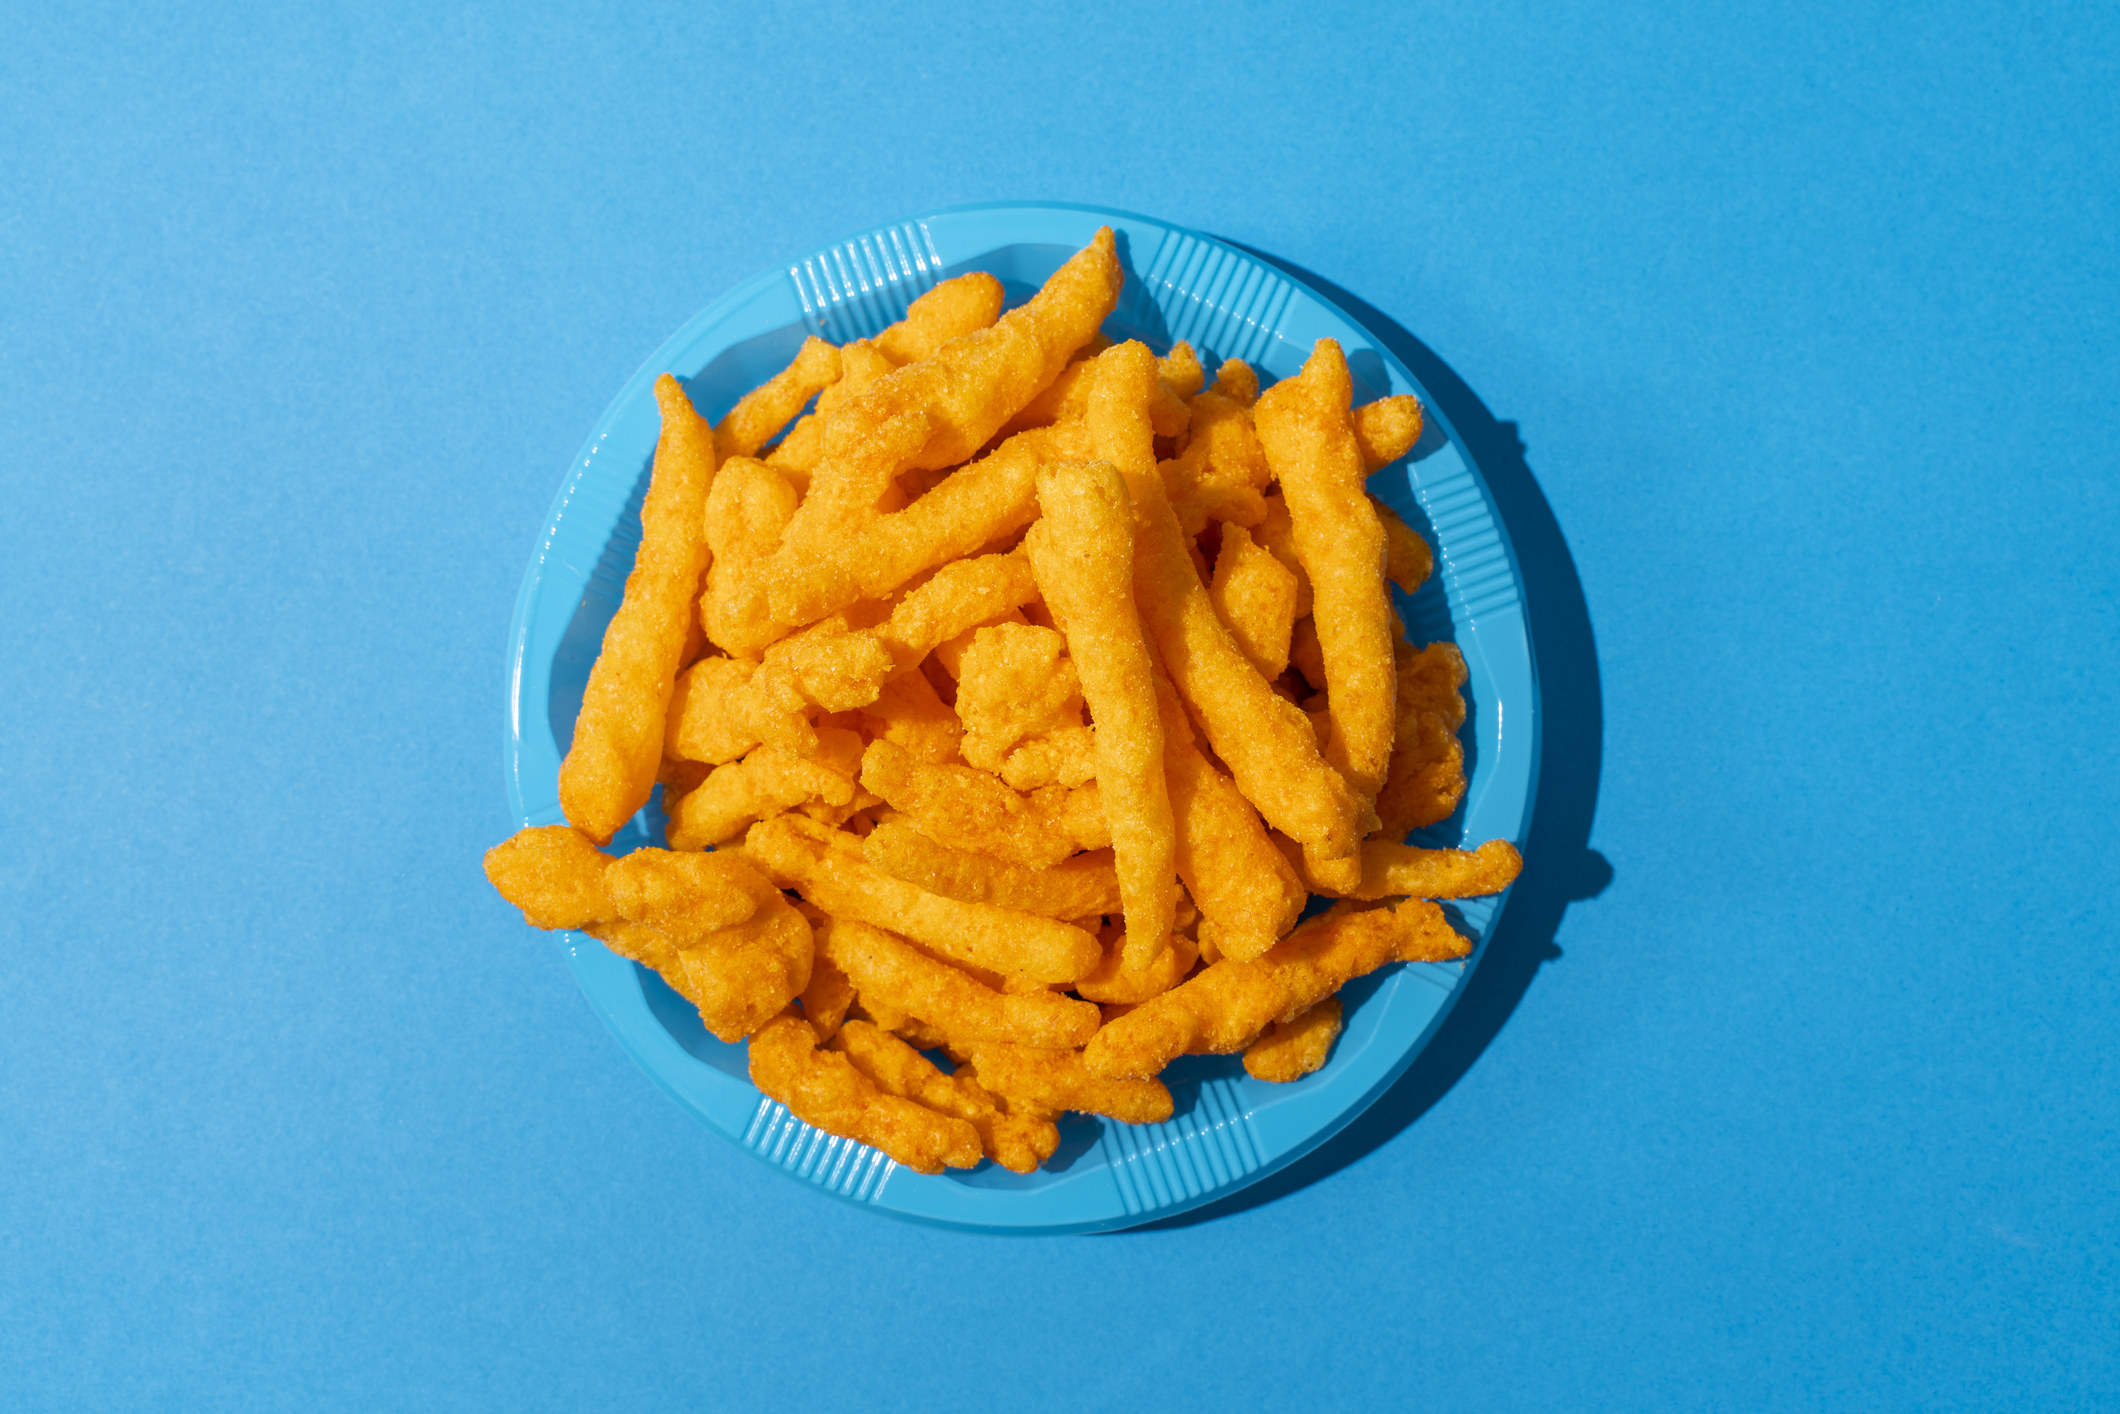 a plate of Cheetos